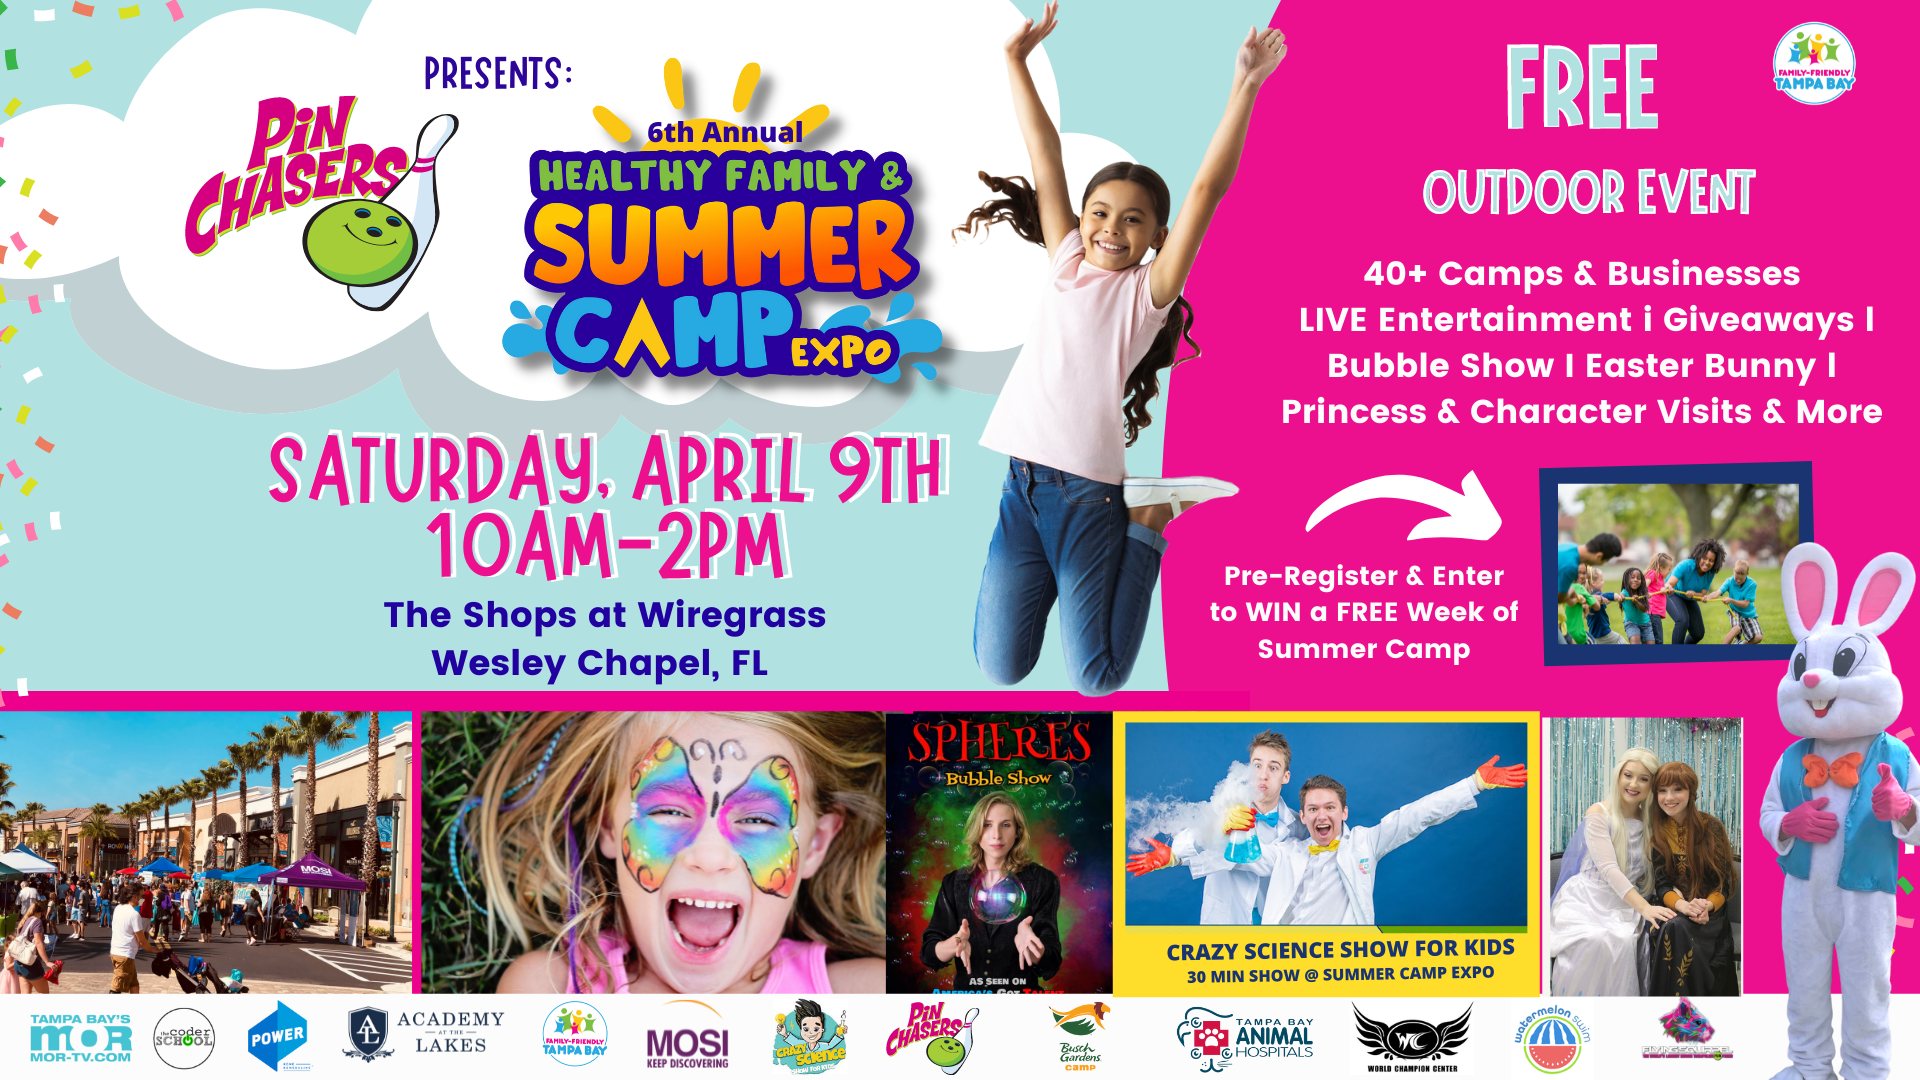 6th Annual Healthy Family & Summer Camp Expo